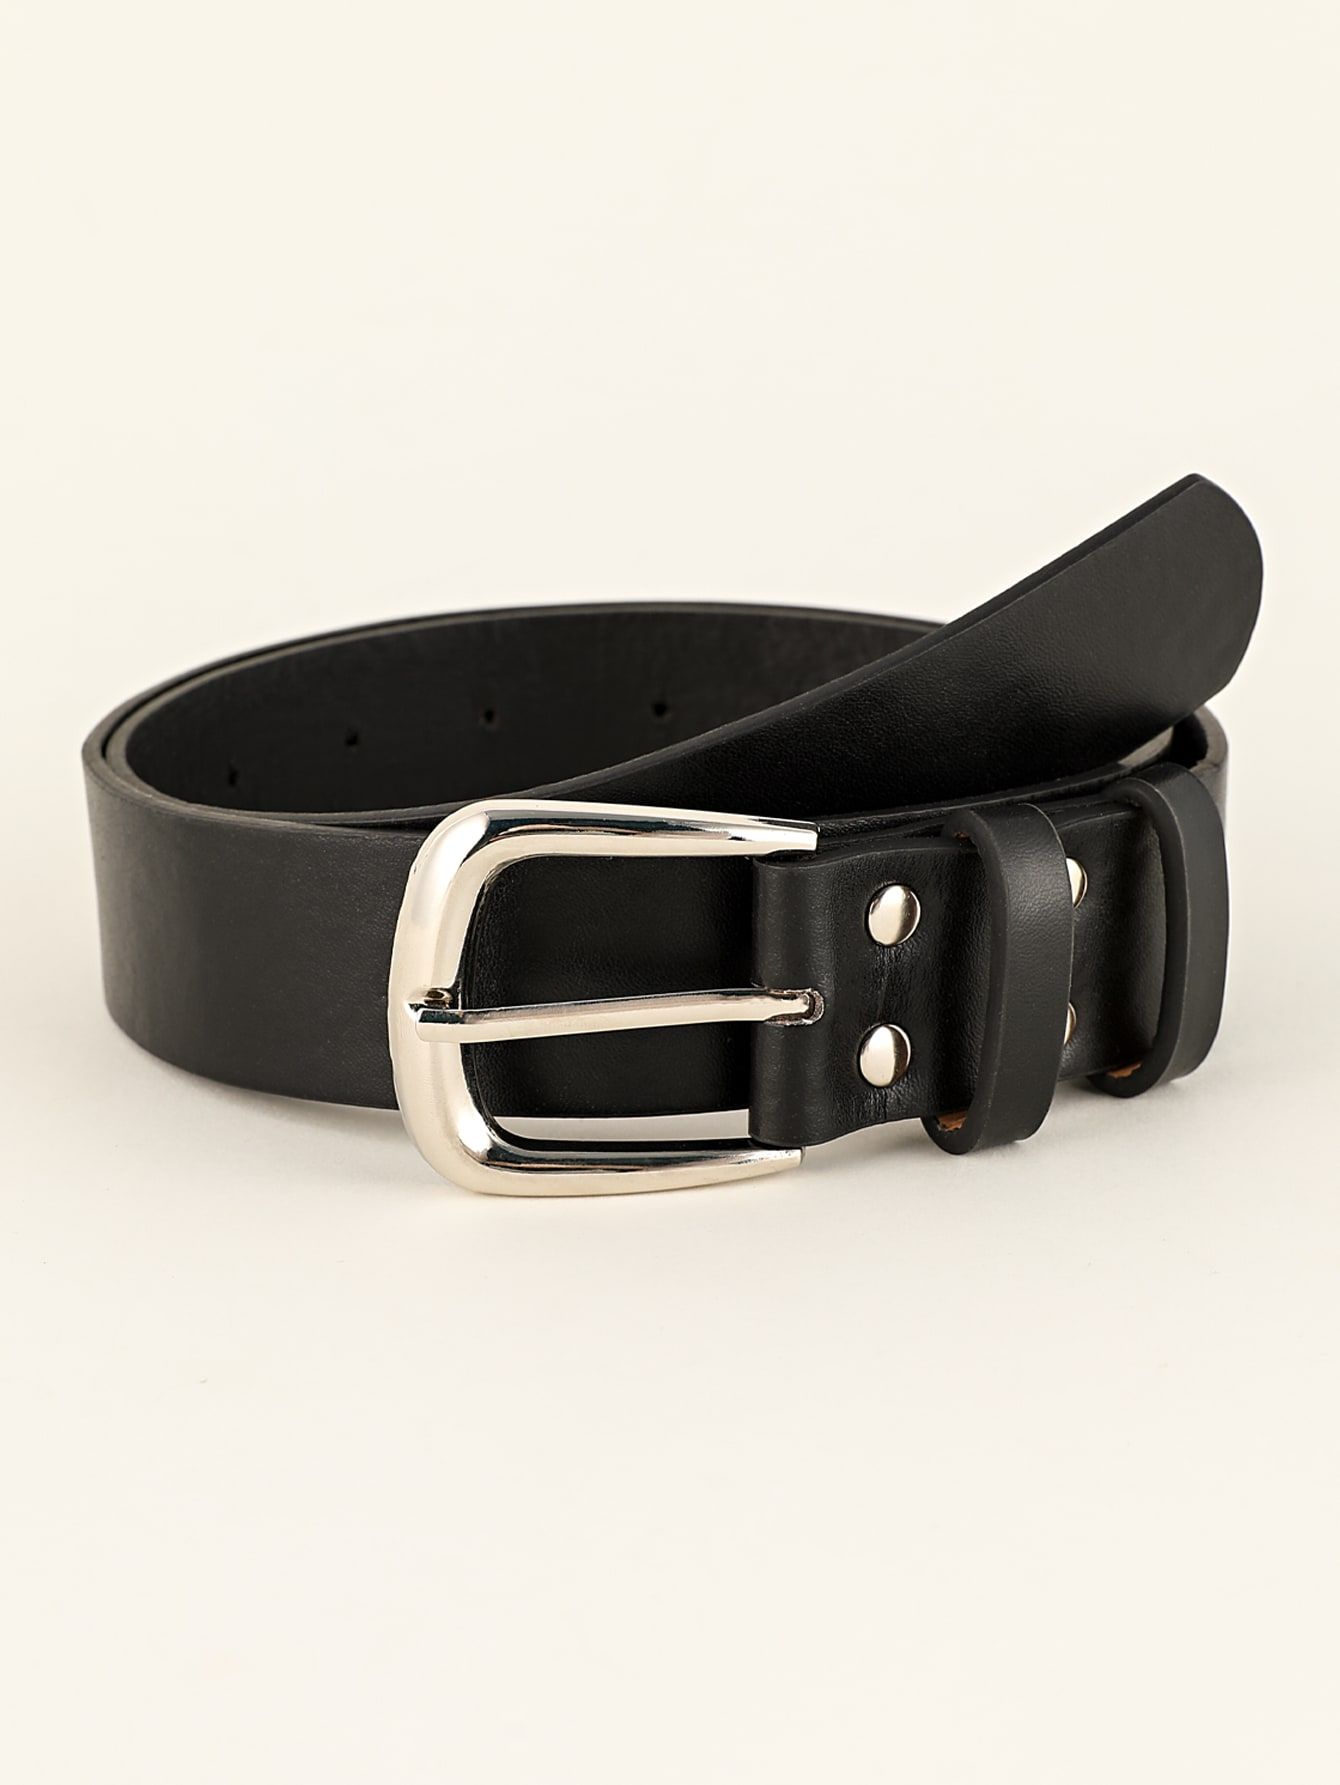 Metallic Accents: Add Edge with Stylish Metal Belts